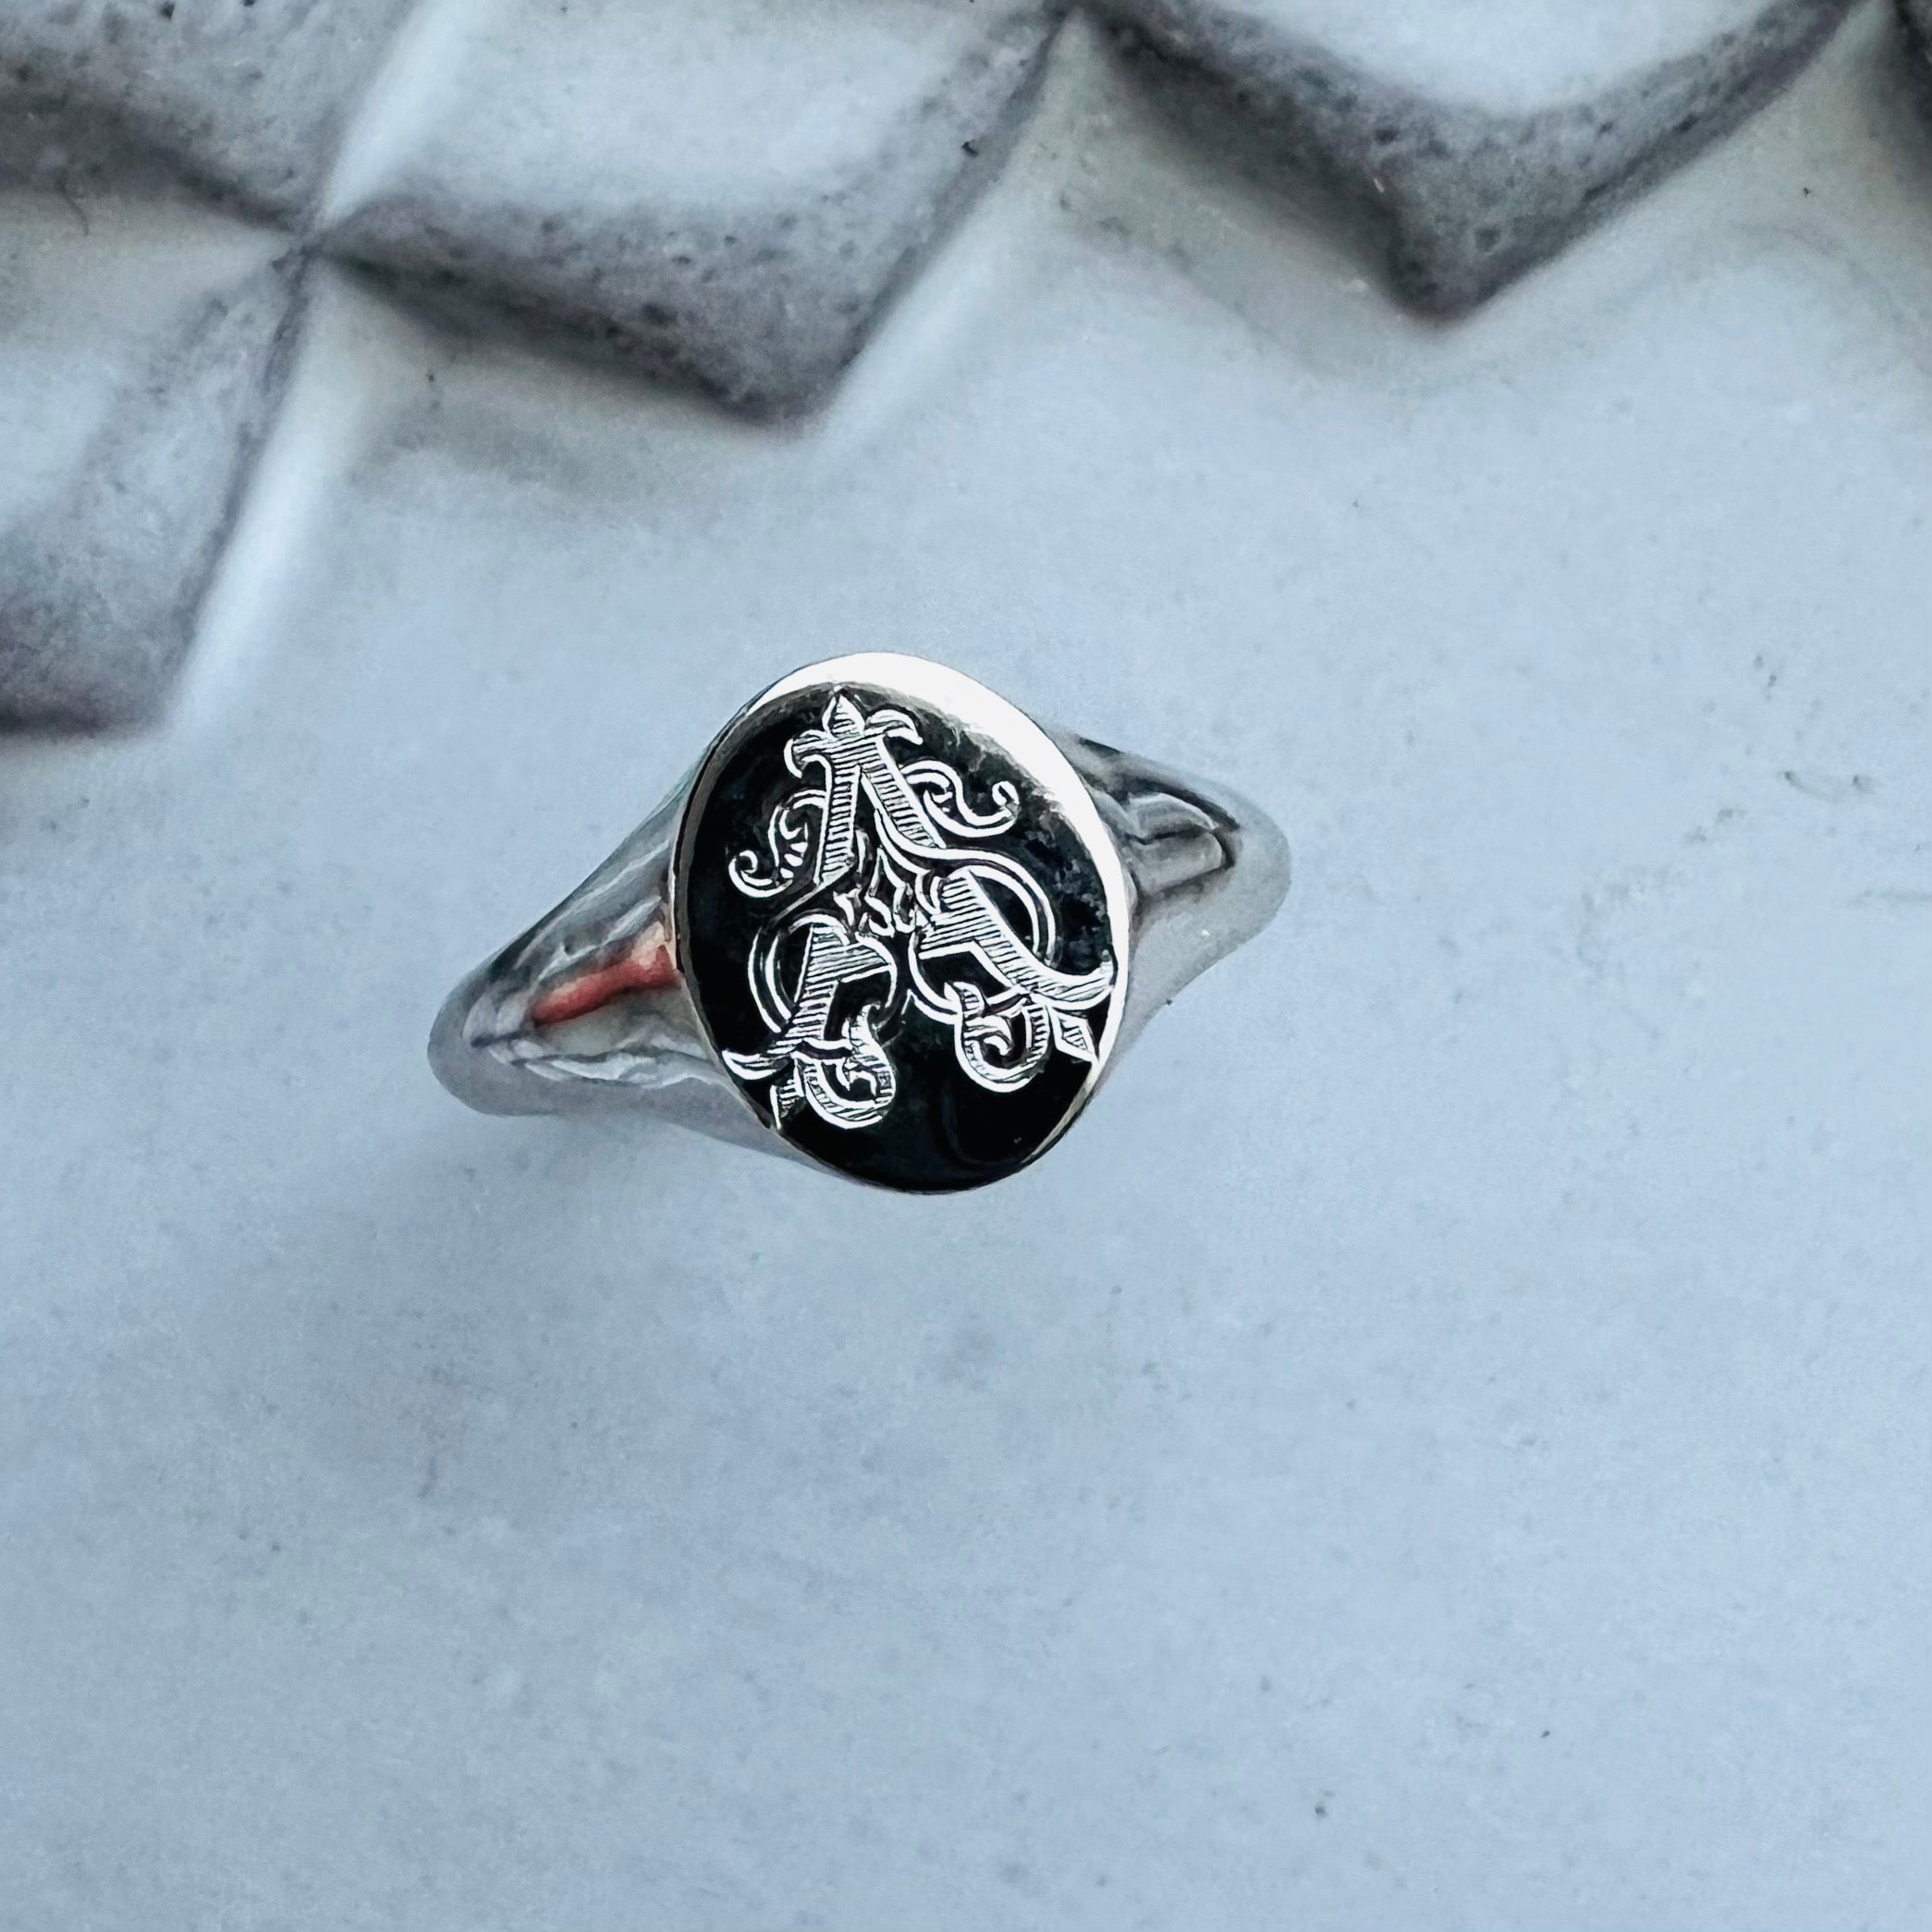 【SILVER】Small Oval Signet Ring